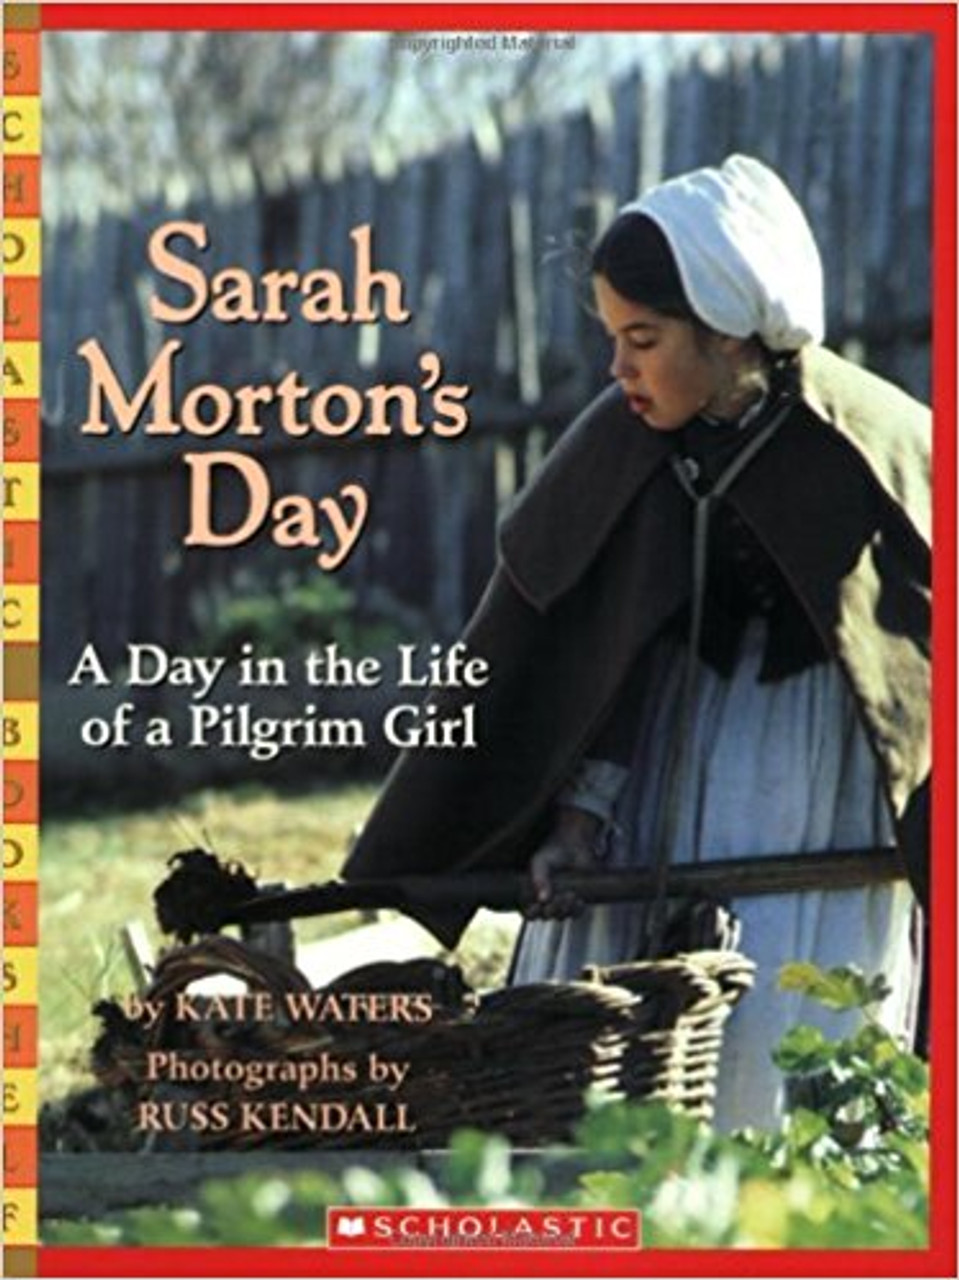 At sunup when the cockerel crows, young Sarah Morton's day begins. Come and join her as she goes about her work and play in an early American settlement in the year 1627.